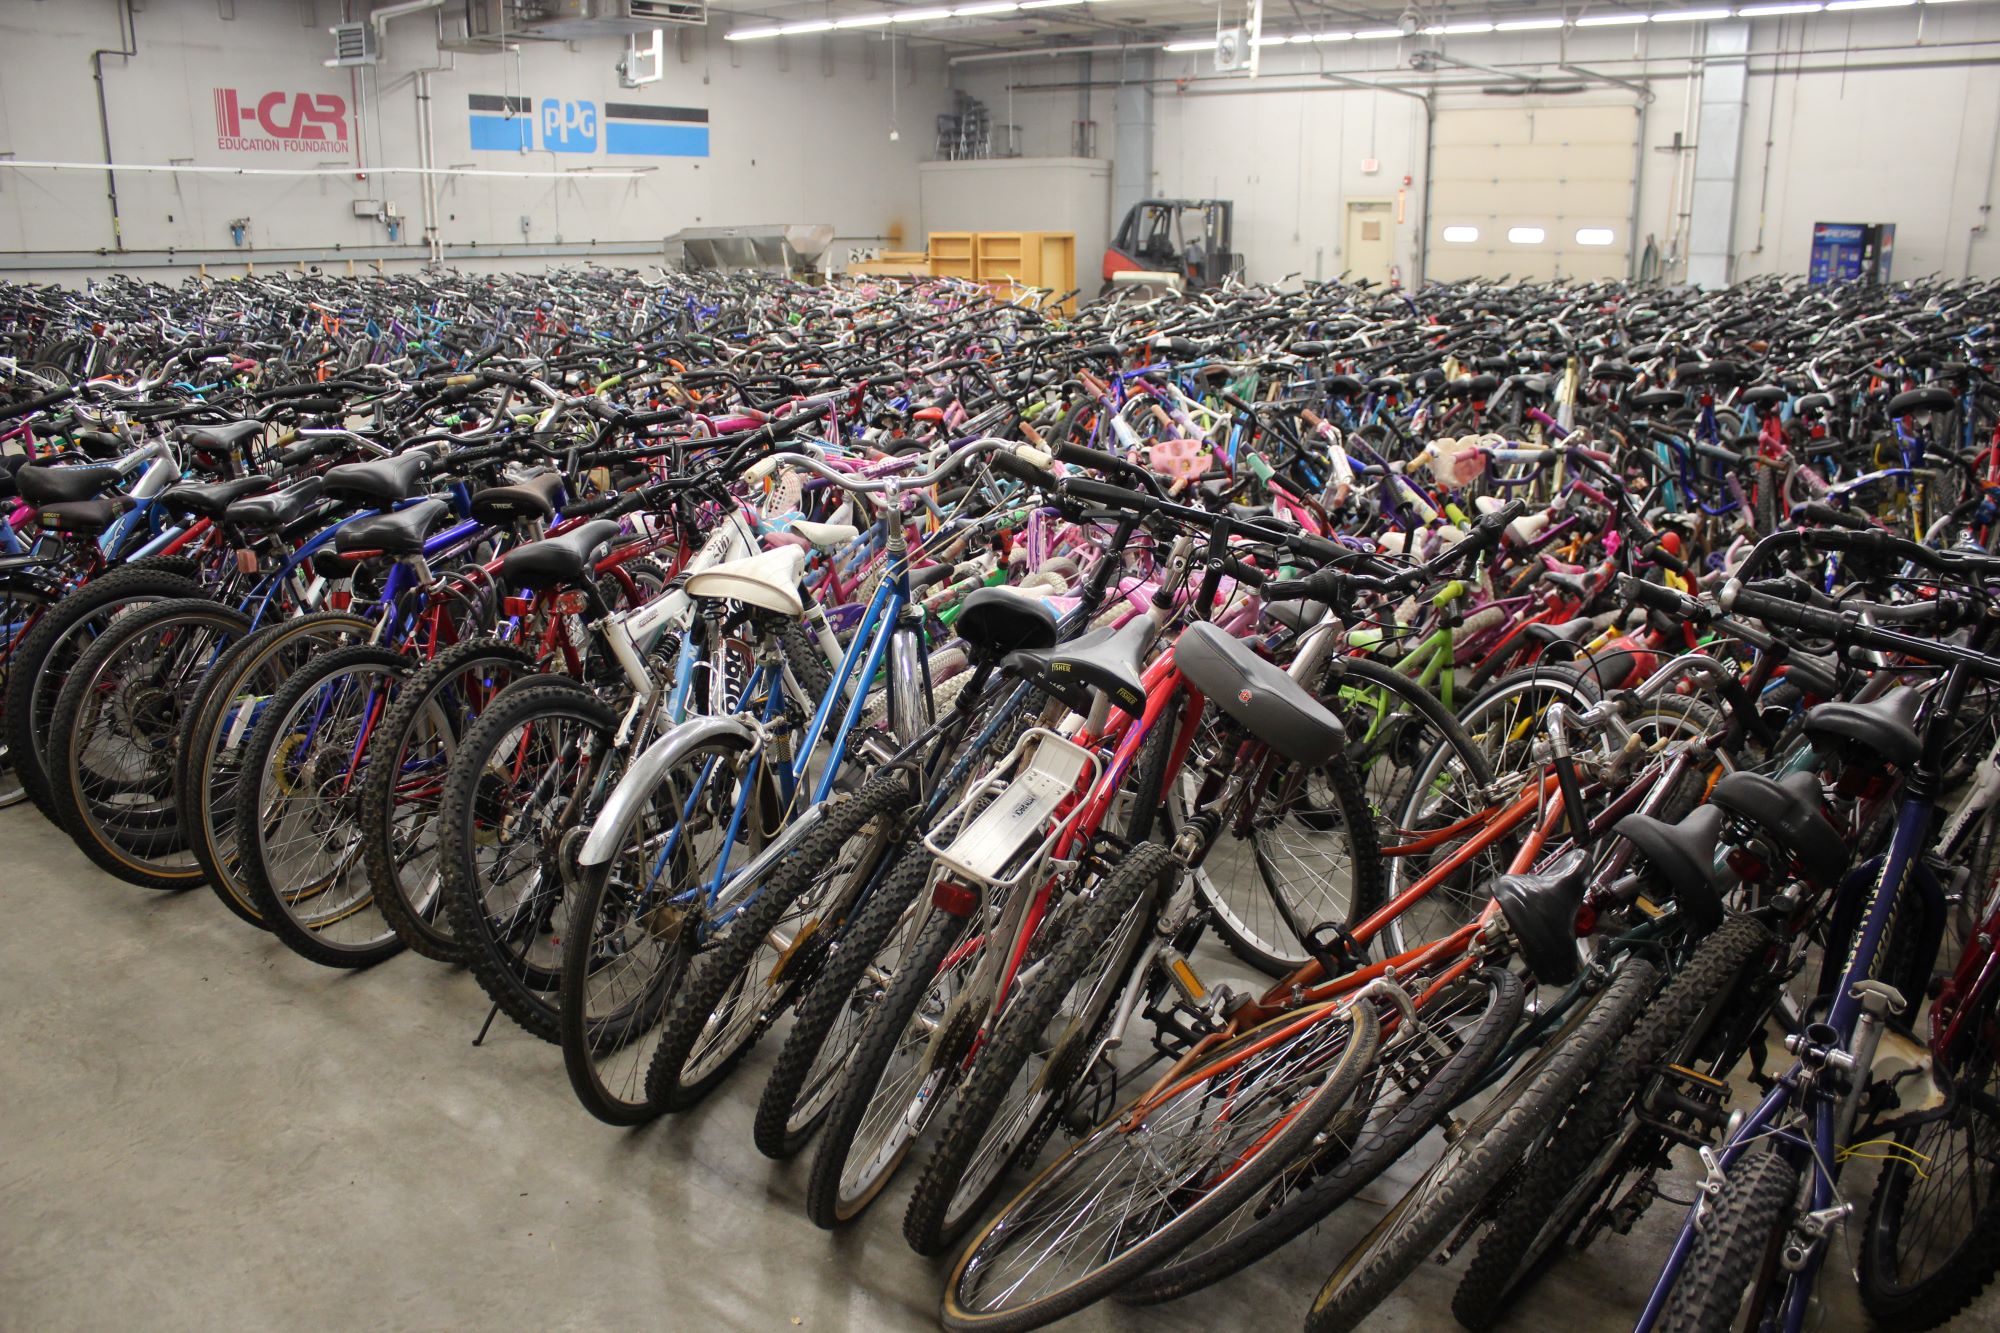 1,000 bikes in DL 20 Acts of Kindness